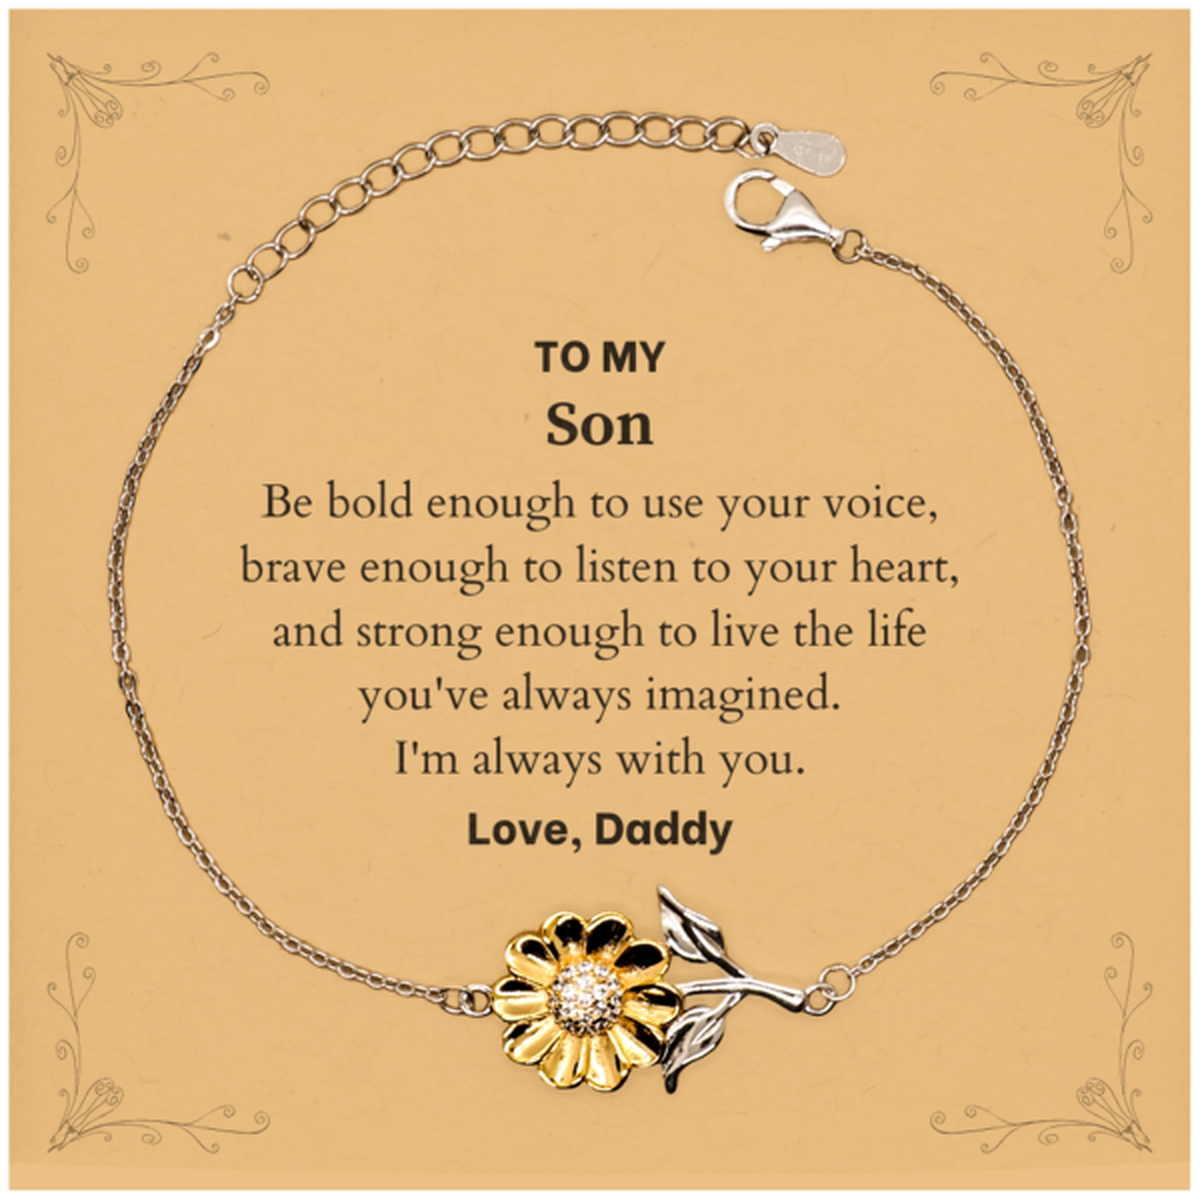 Keepsake Son Sunflower Bracelet Gift Idea Graduation Christmas Birthday Son from Daddy, Son Be bold enough to use your voice, brave enough to listen to your heart. Love, Daddy